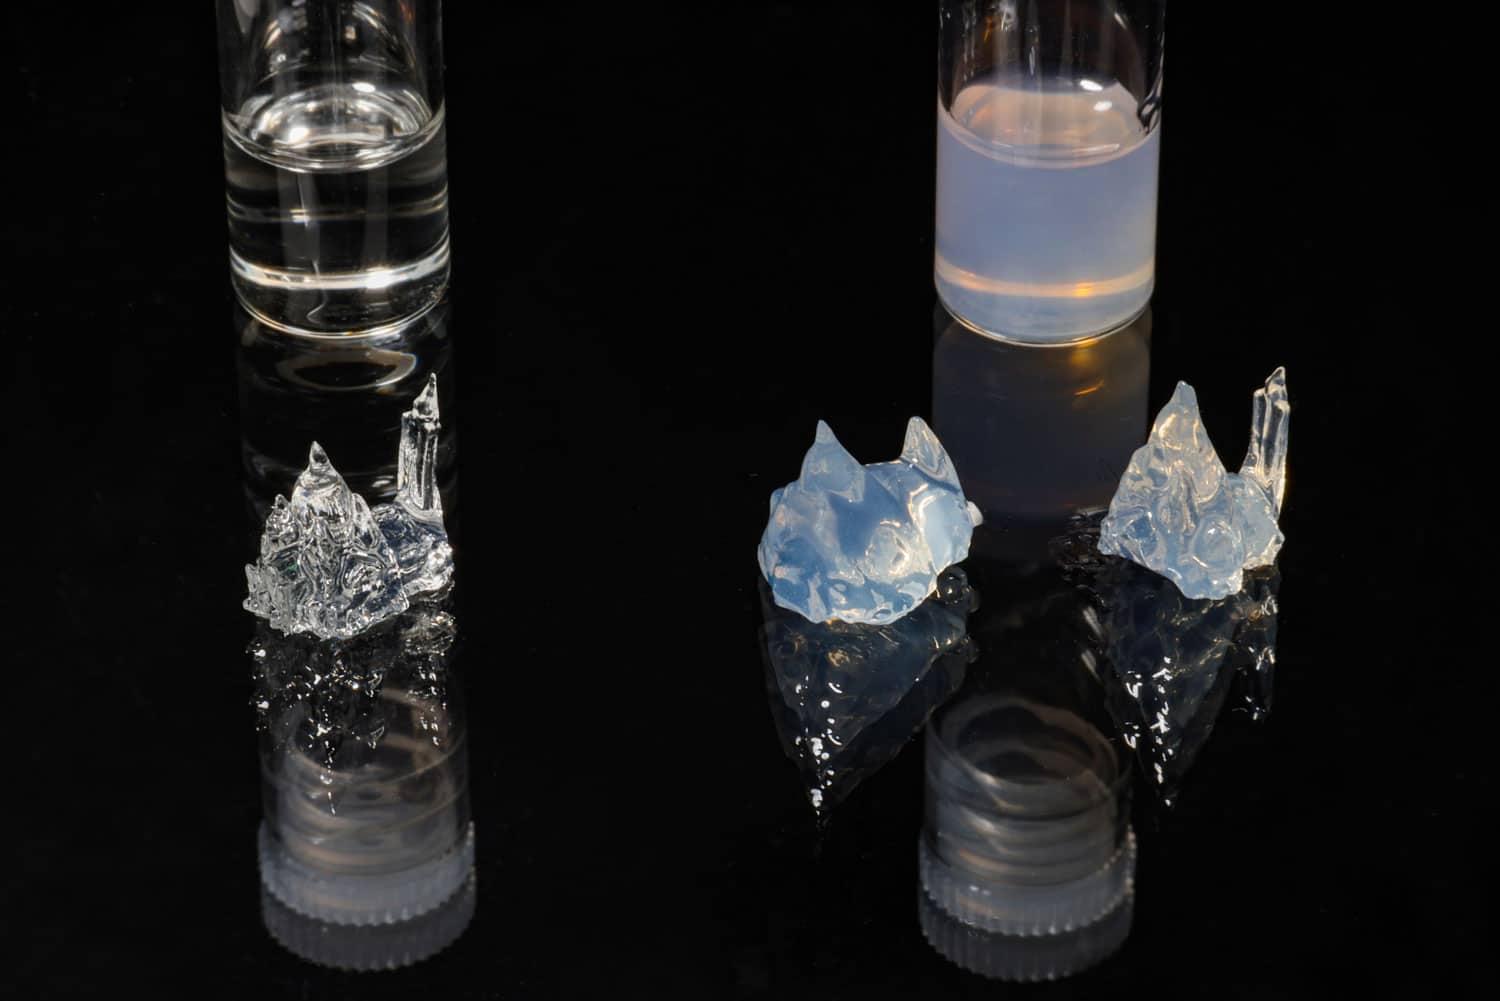 New 3D printing method uses light to make objects from opaque resin